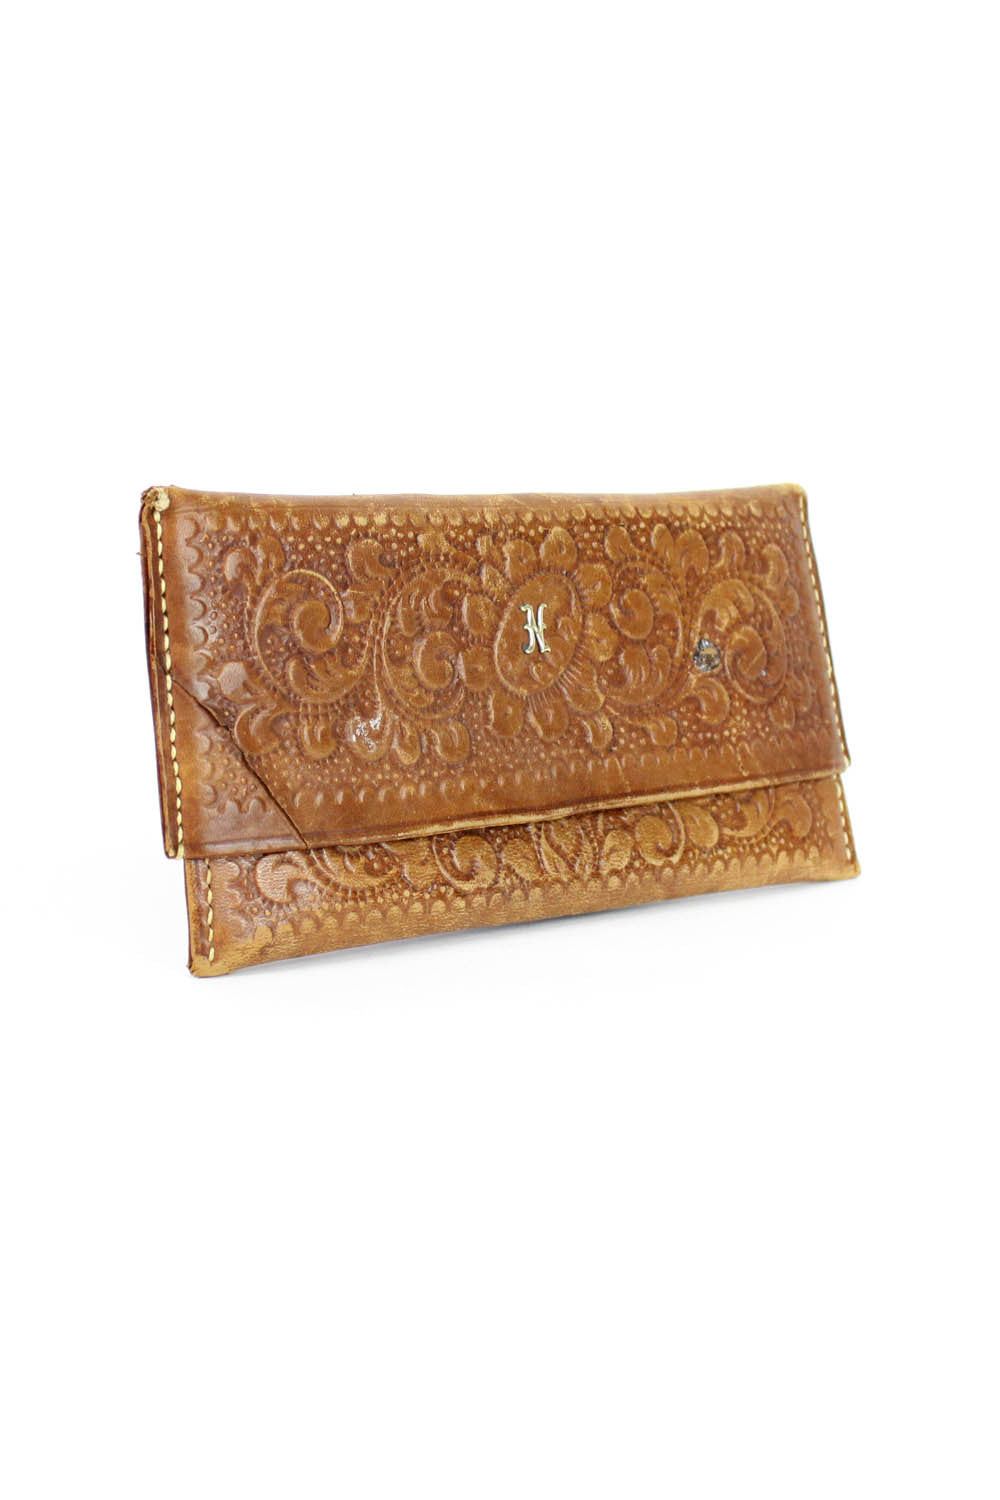 tooled leather wallet